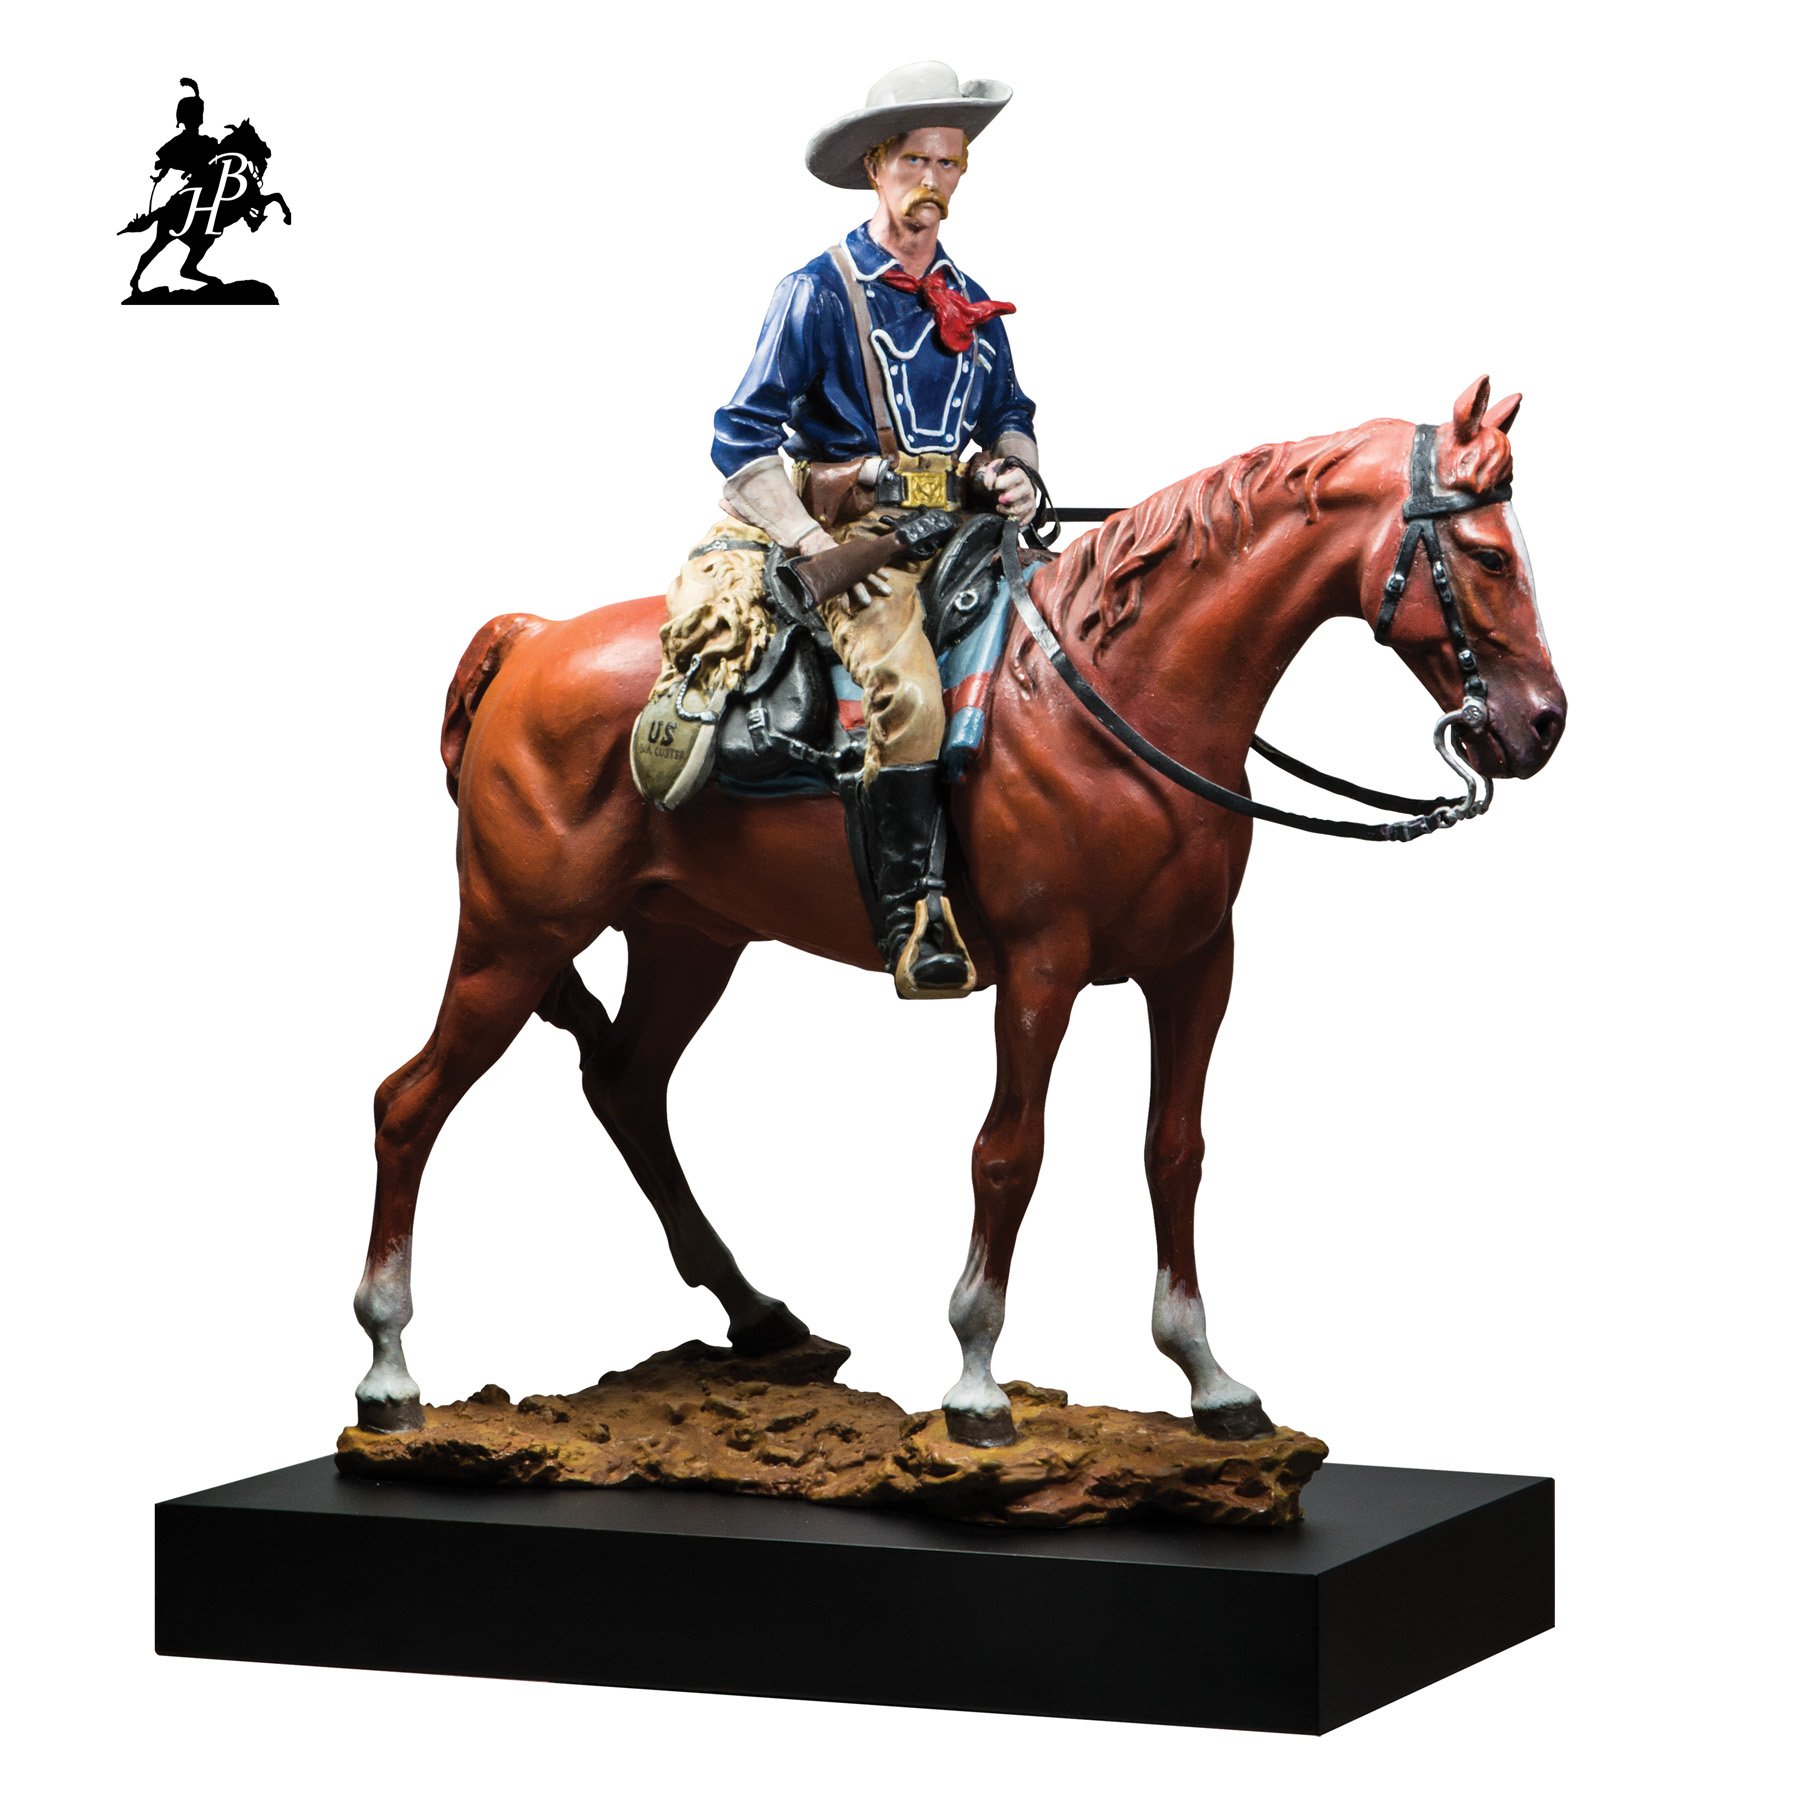 Fernando  Andrea; Polychromed General Georg..., 2014, Original Sculpture Bronze, 7.5 x 17 inches. Artwork description: 241  i? 1/2General George Armstrong CusterSon of the Morning Stari? 1/2Polychrome bronze version,available by special order only.  BY FERNANDO ANDREASCALE 16 BRONZE SCULPTURELIMITED EDITION 20 copiesCERTIFICATE OF AUTHENTICITY INCLUDEDWax Stamp and signature of the sculptorHISTORYBeginning in the Renaissance, bronzes were finished with an essentially monochromatic patination ...